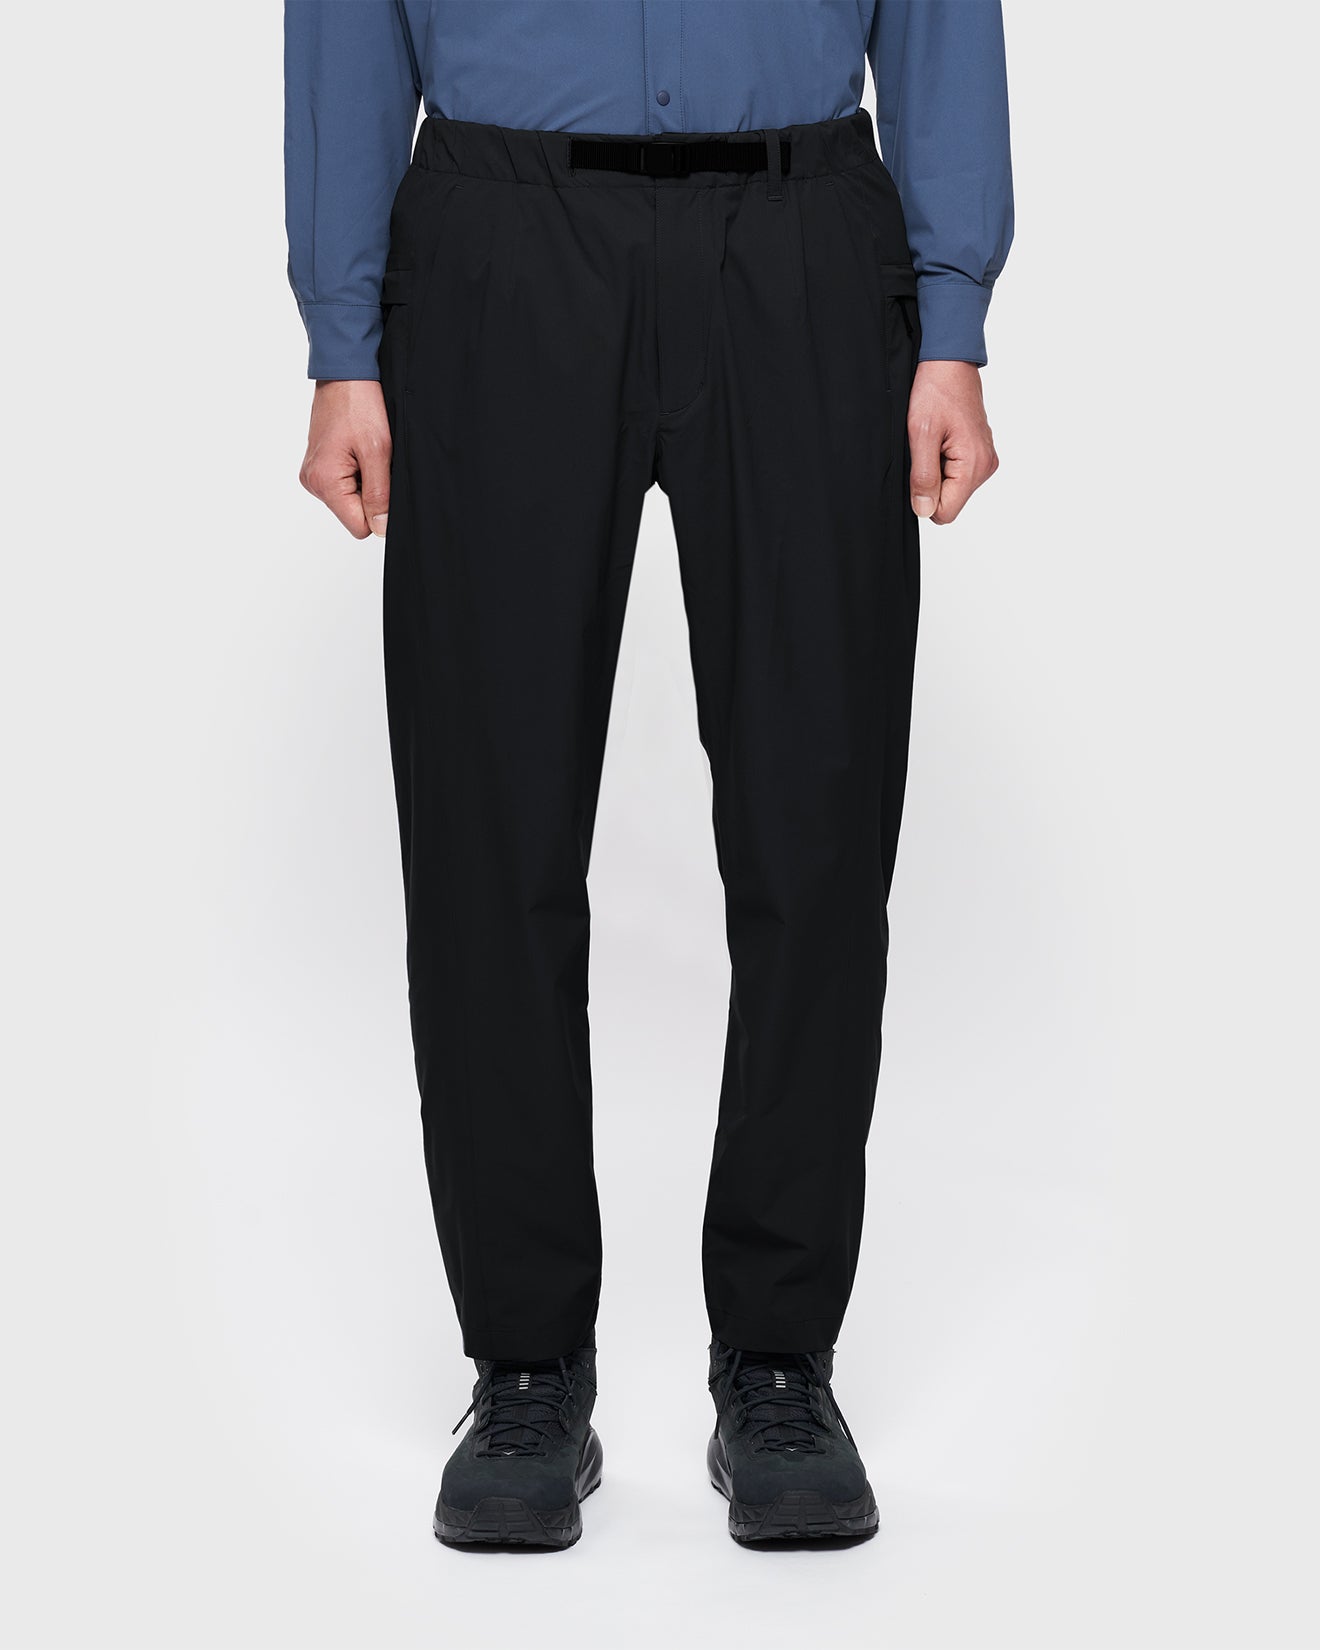 Multi Field Tapered Easy Pants are - Goldwin San Francisco